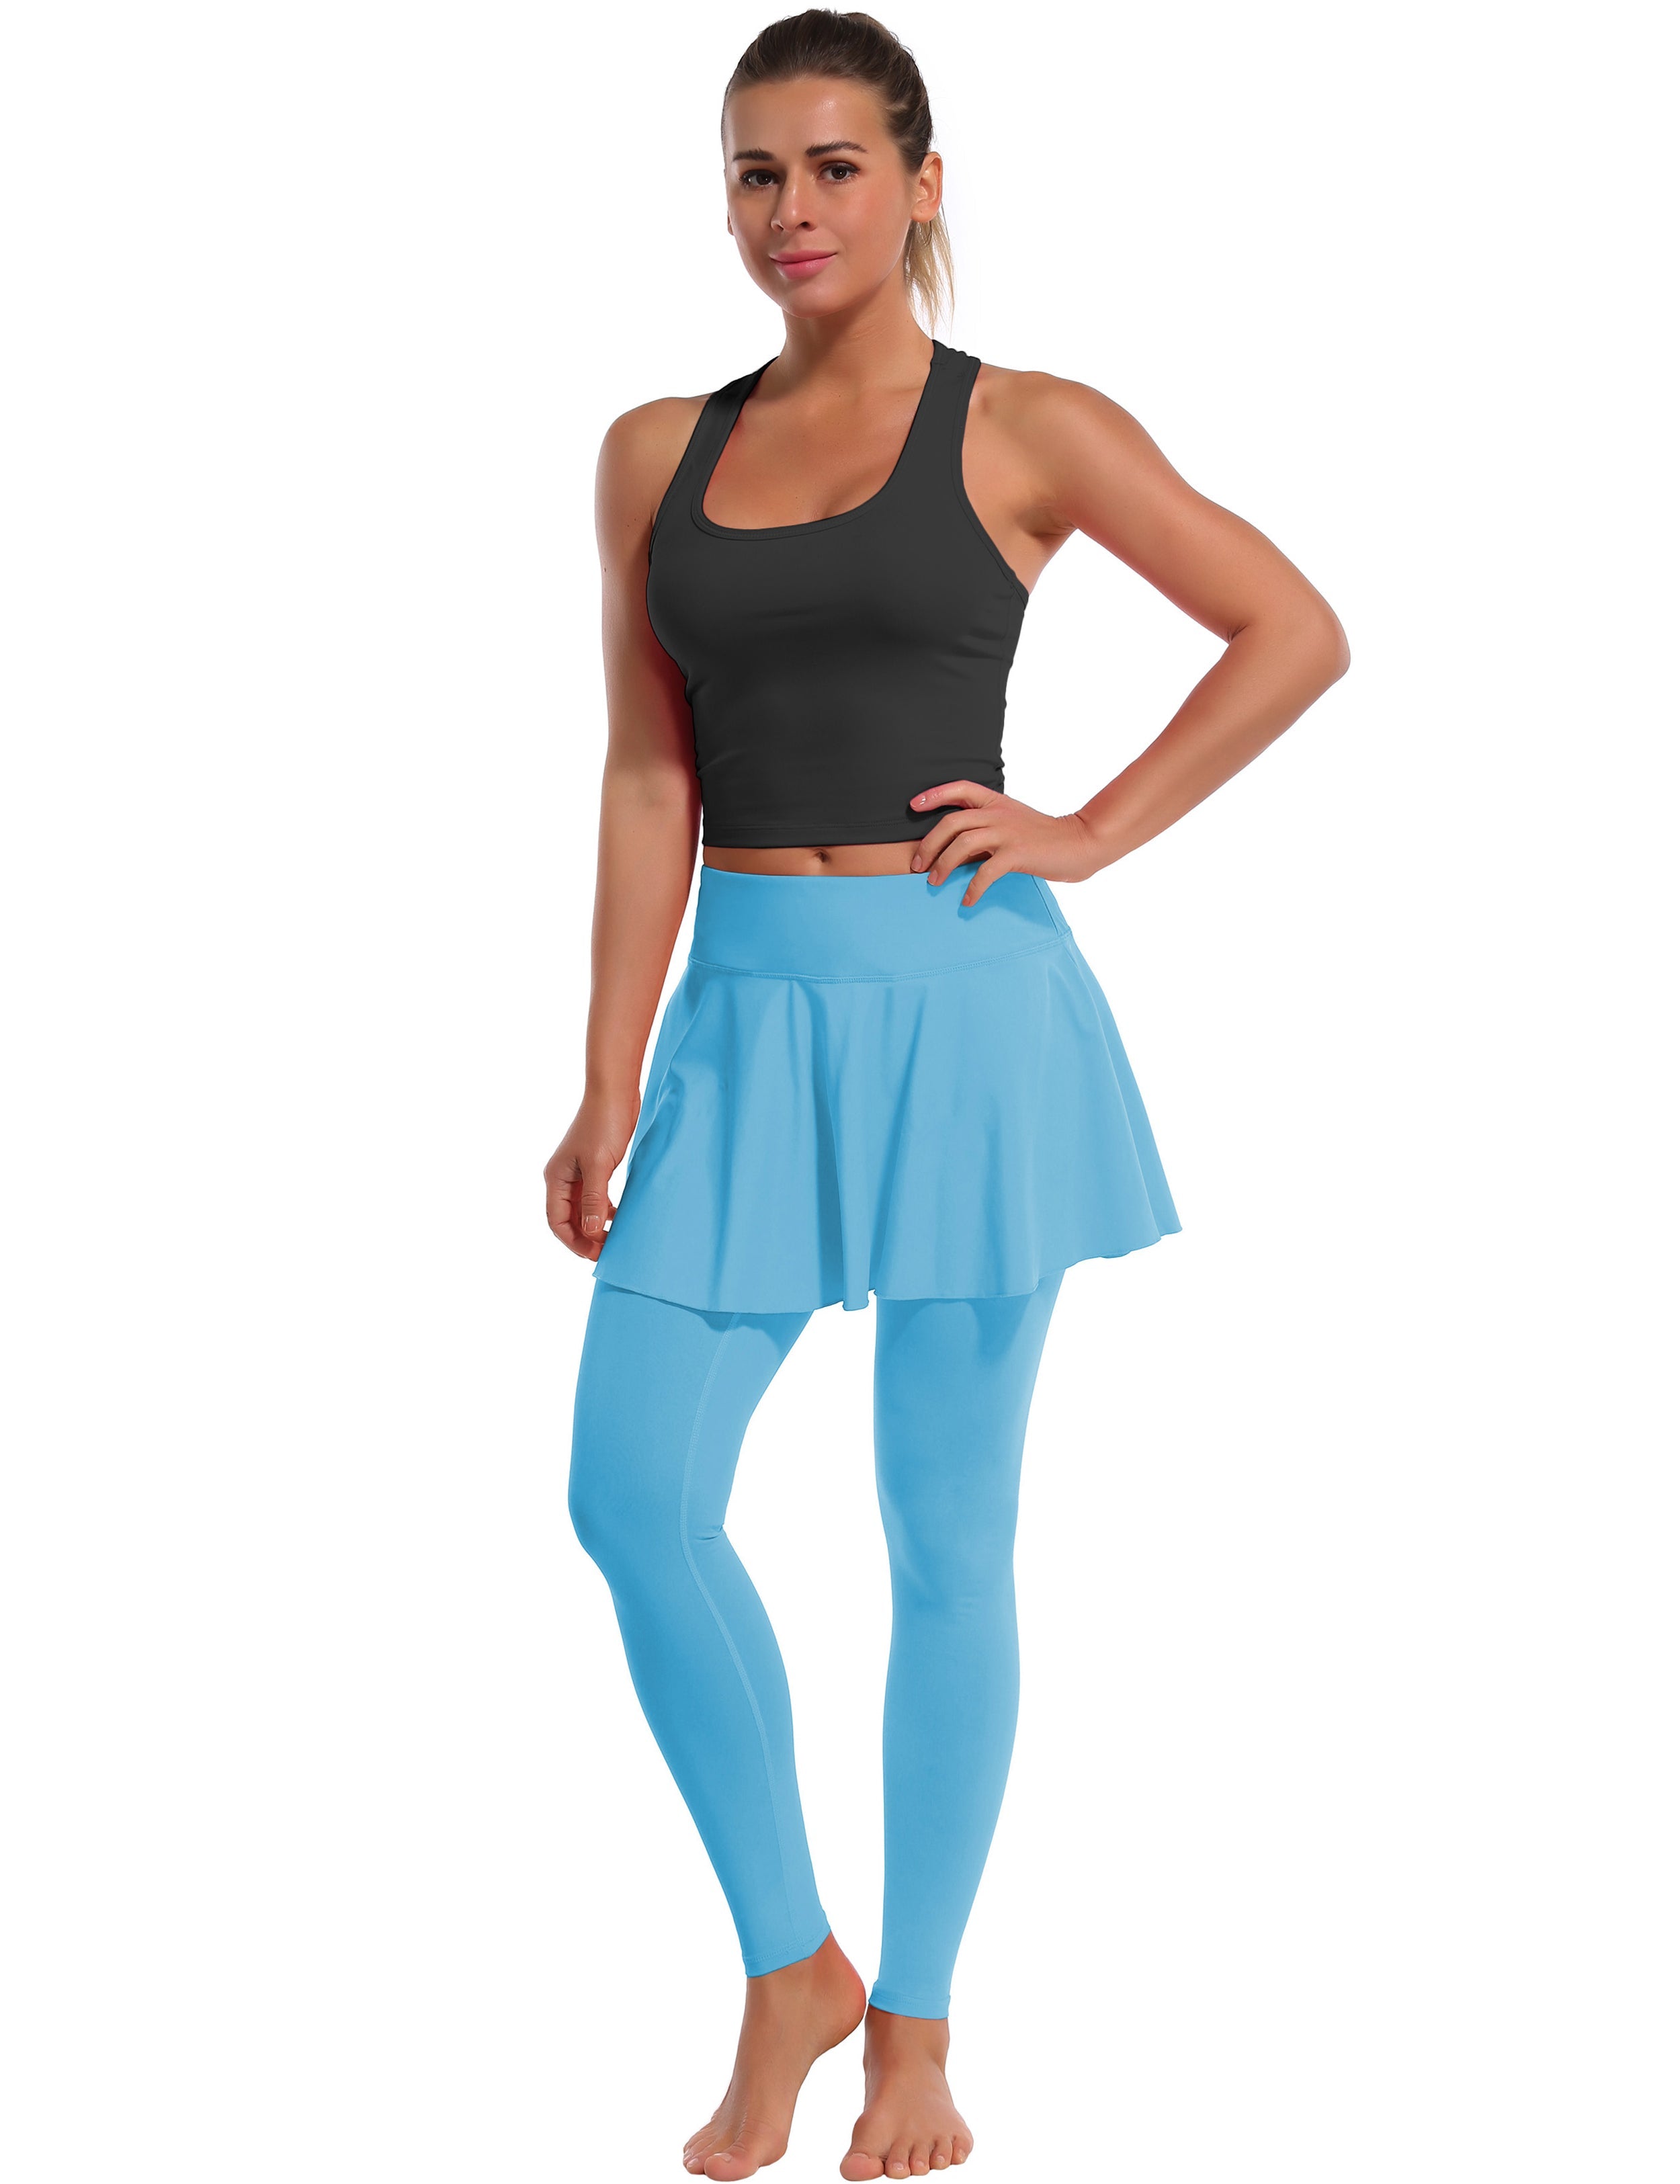 Athletic Tennis Golf Skort with Pocket Shorts blue 80%Nylon/20%Spandex UPF 50+ sun protection Elastic closure Lightweight, Wrinkle Moisture wicking Quick drying Secure & comfortable two layer Hidden pocket